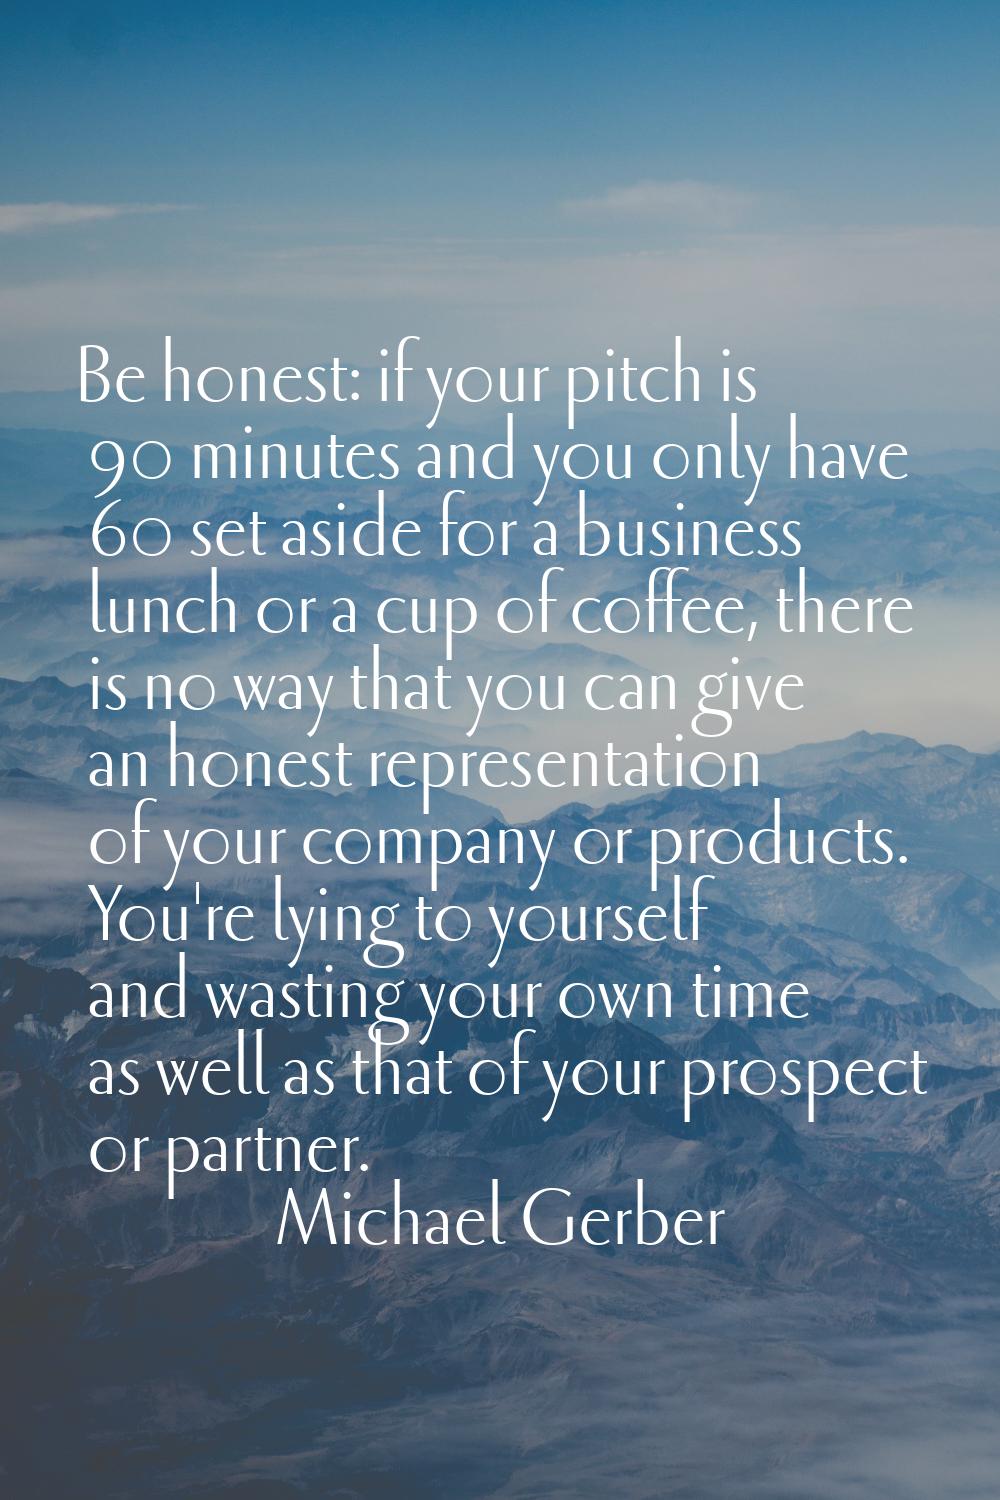 Be honest: if your pitch is 90 minutes and you only have 60 set aside for a business lunch or a cup